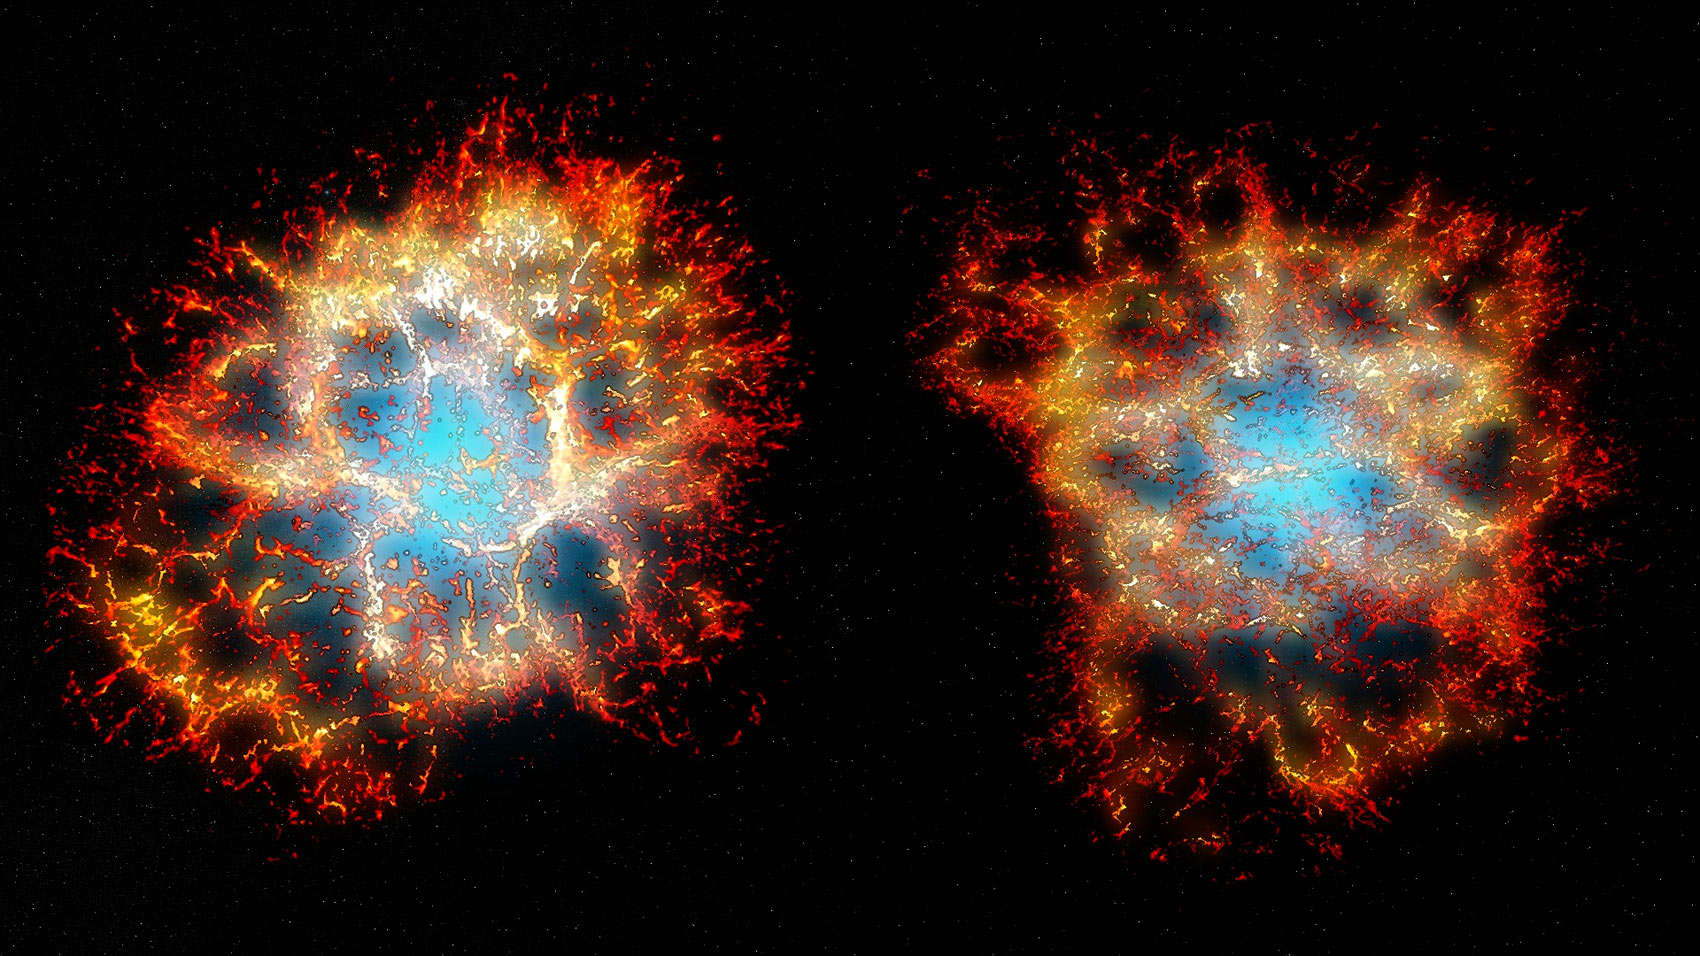 The Fusion of Two Stars Resulted in a Blue Supergiant, Marking an Iconic Supernova.